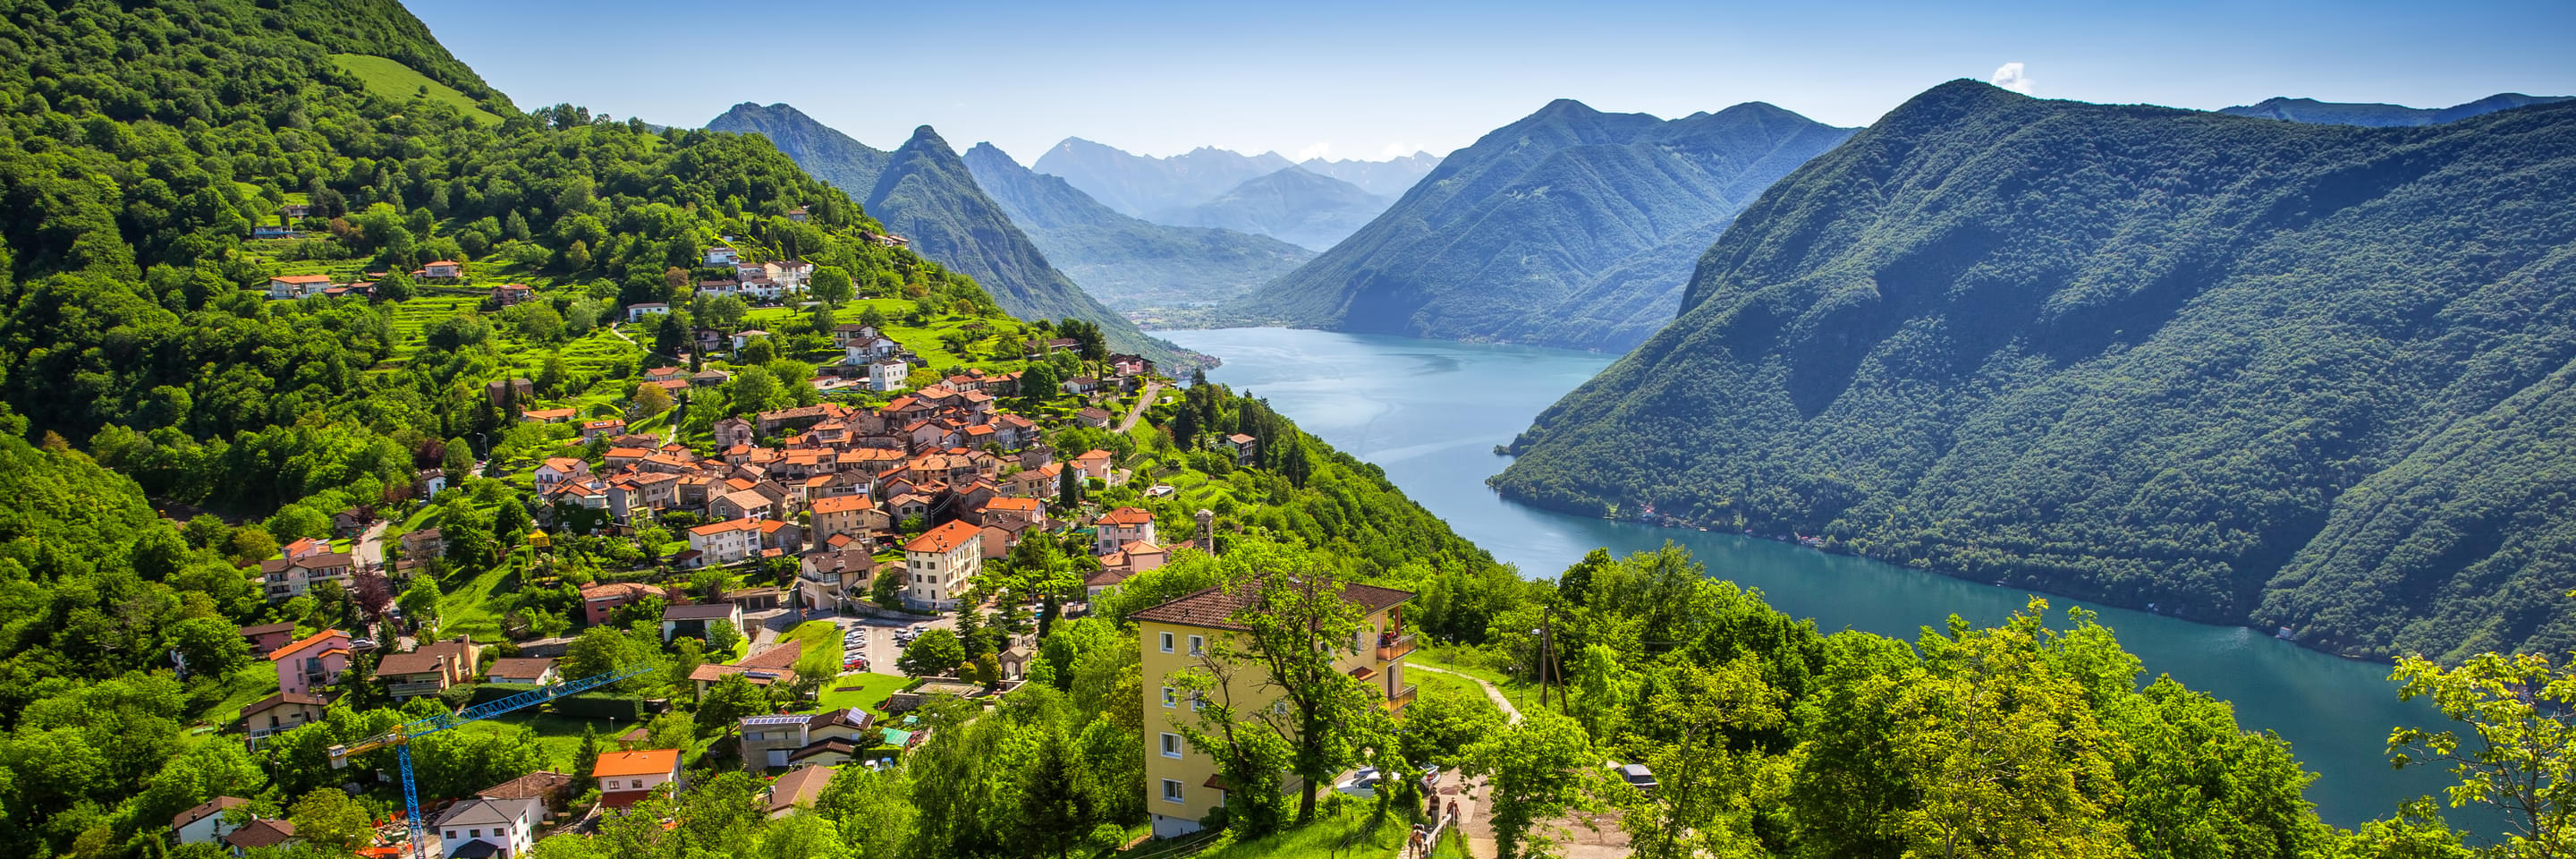 Things to Do in Lugano